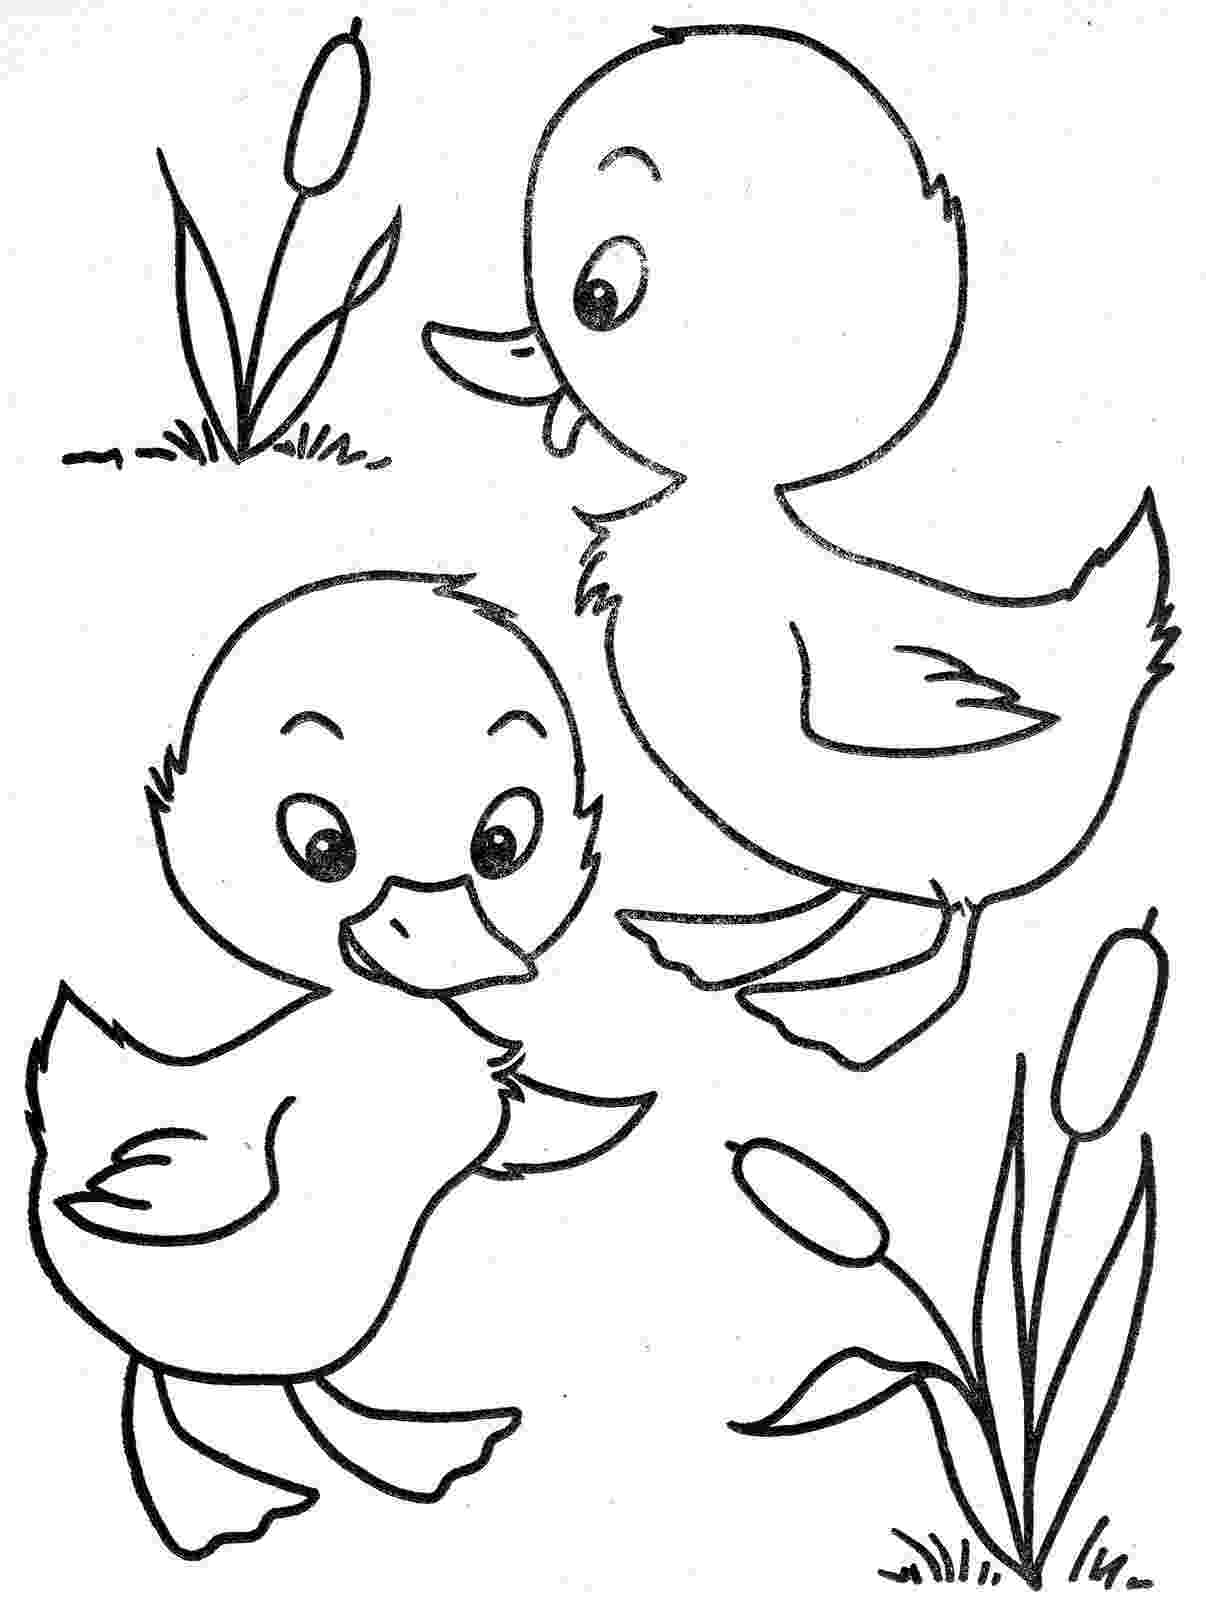 duck coloring sheet two little ducks embroidery patterns pinterest duck coloring sheet 